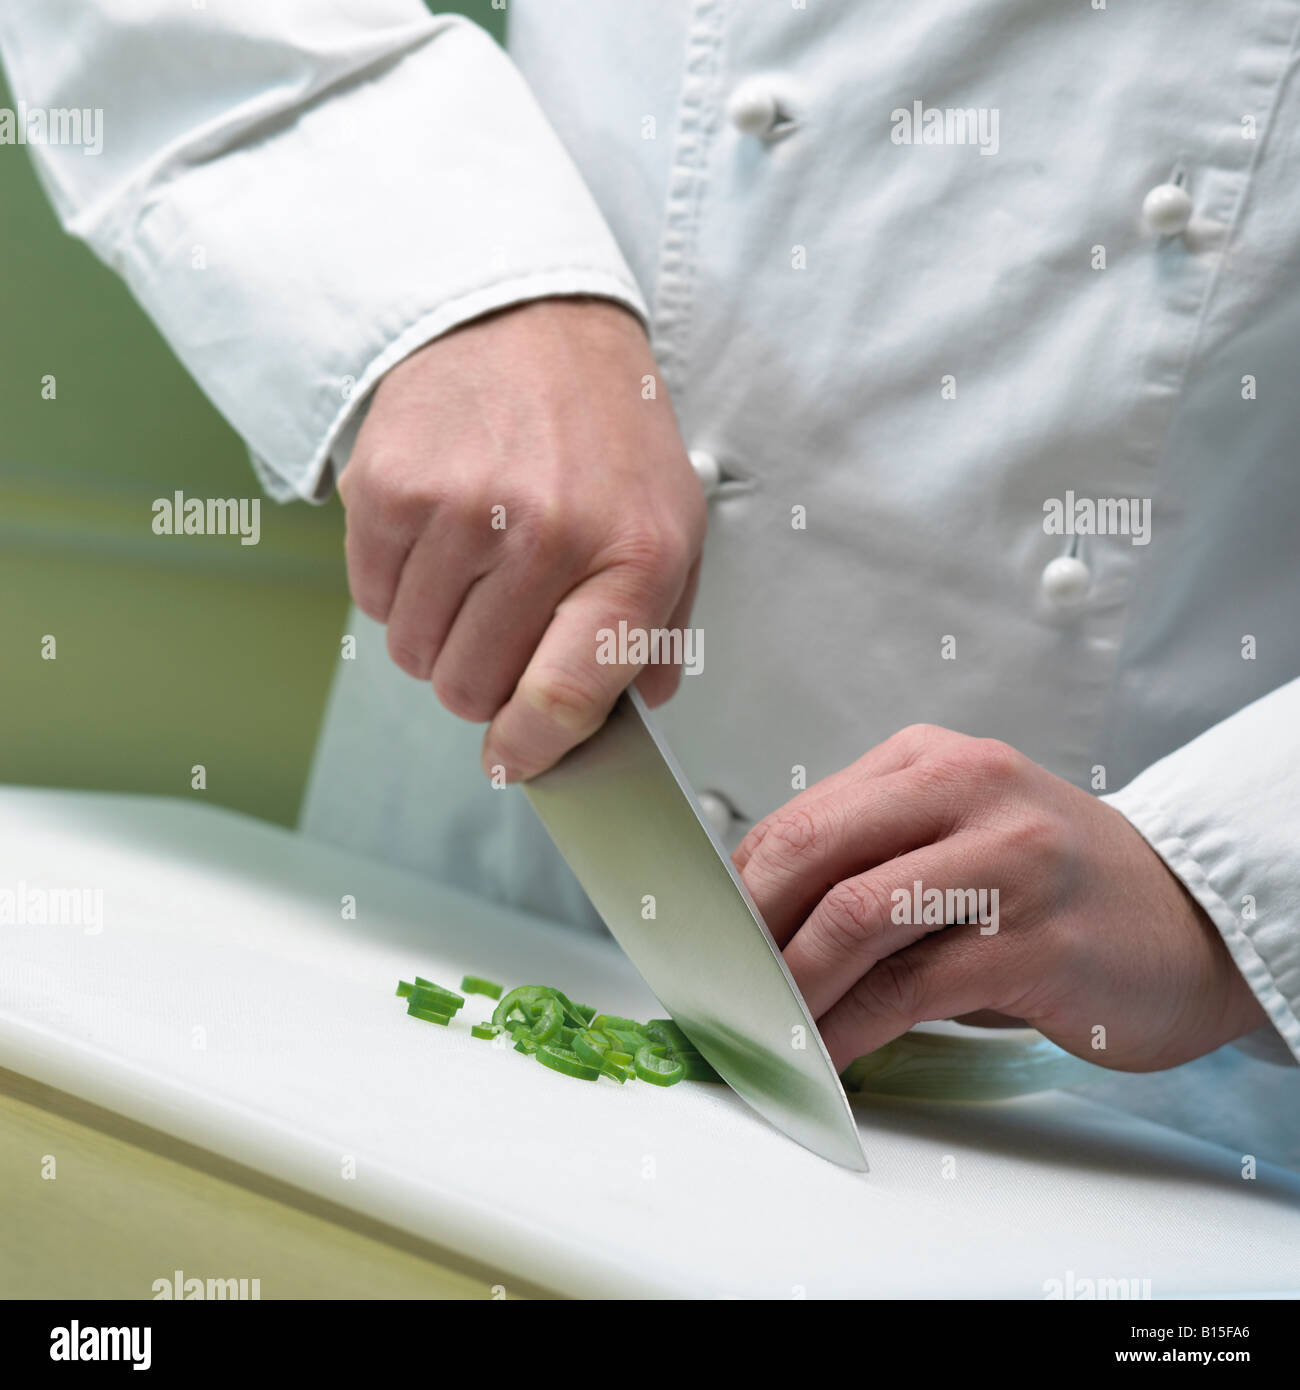 cook is cutting leek close up hands and knife Stock Photo